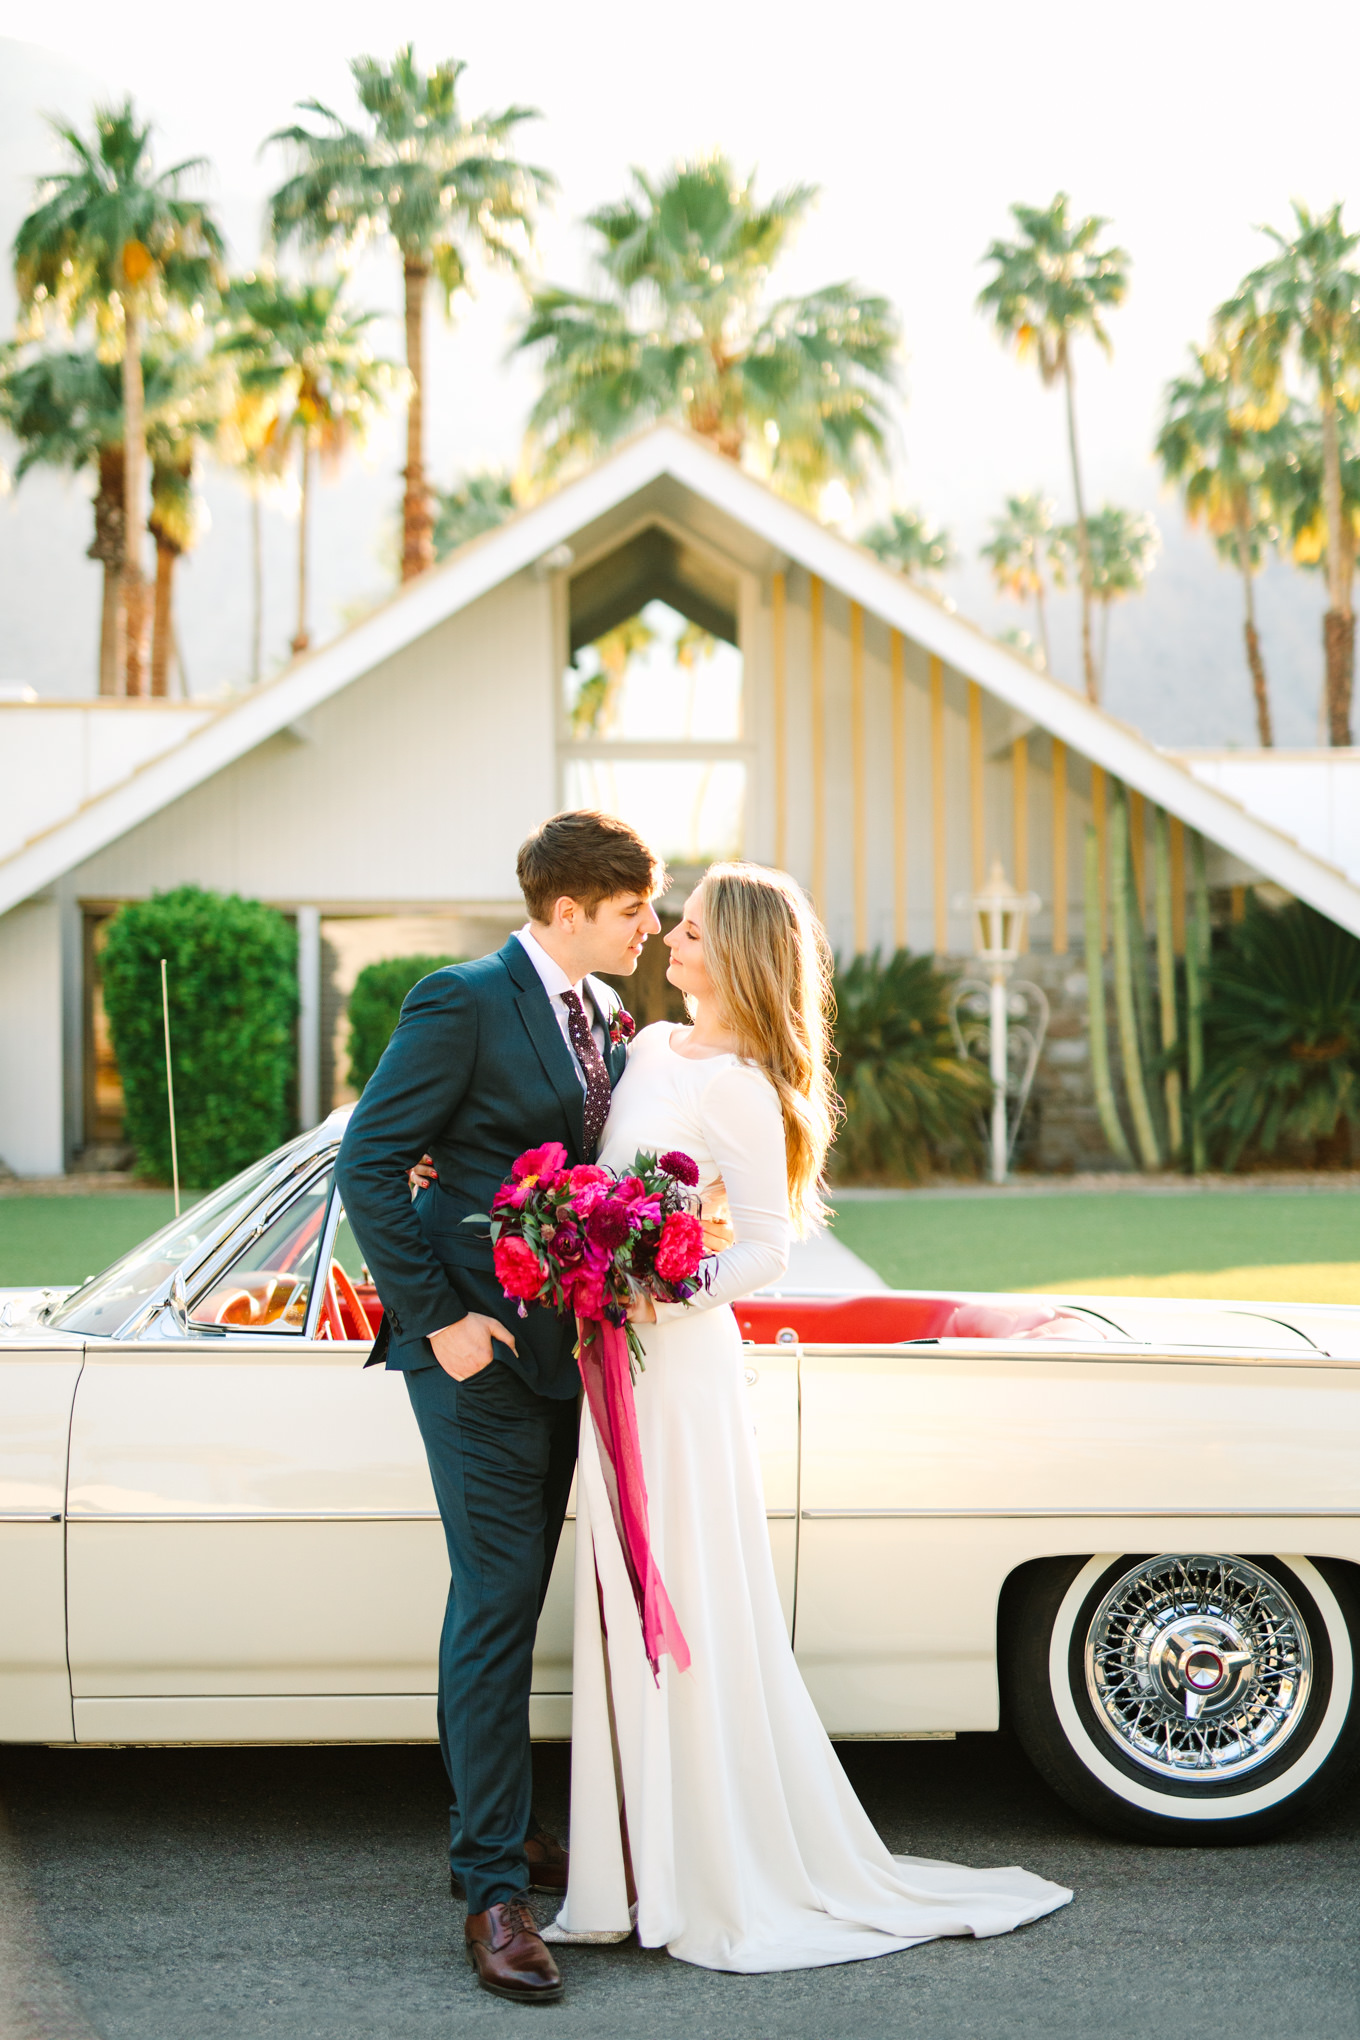 Bride and groom with classic car in Mid Century Modern neighborhood | Colorful jewel tone Palm Springs elopement | Fresh and colorful photography for fun-loving couples in Southern California | #colorfulelopement #palmspringselopement #elopementphotography #palmspringswedding Source: Mary Costa Photography | Los Angeles